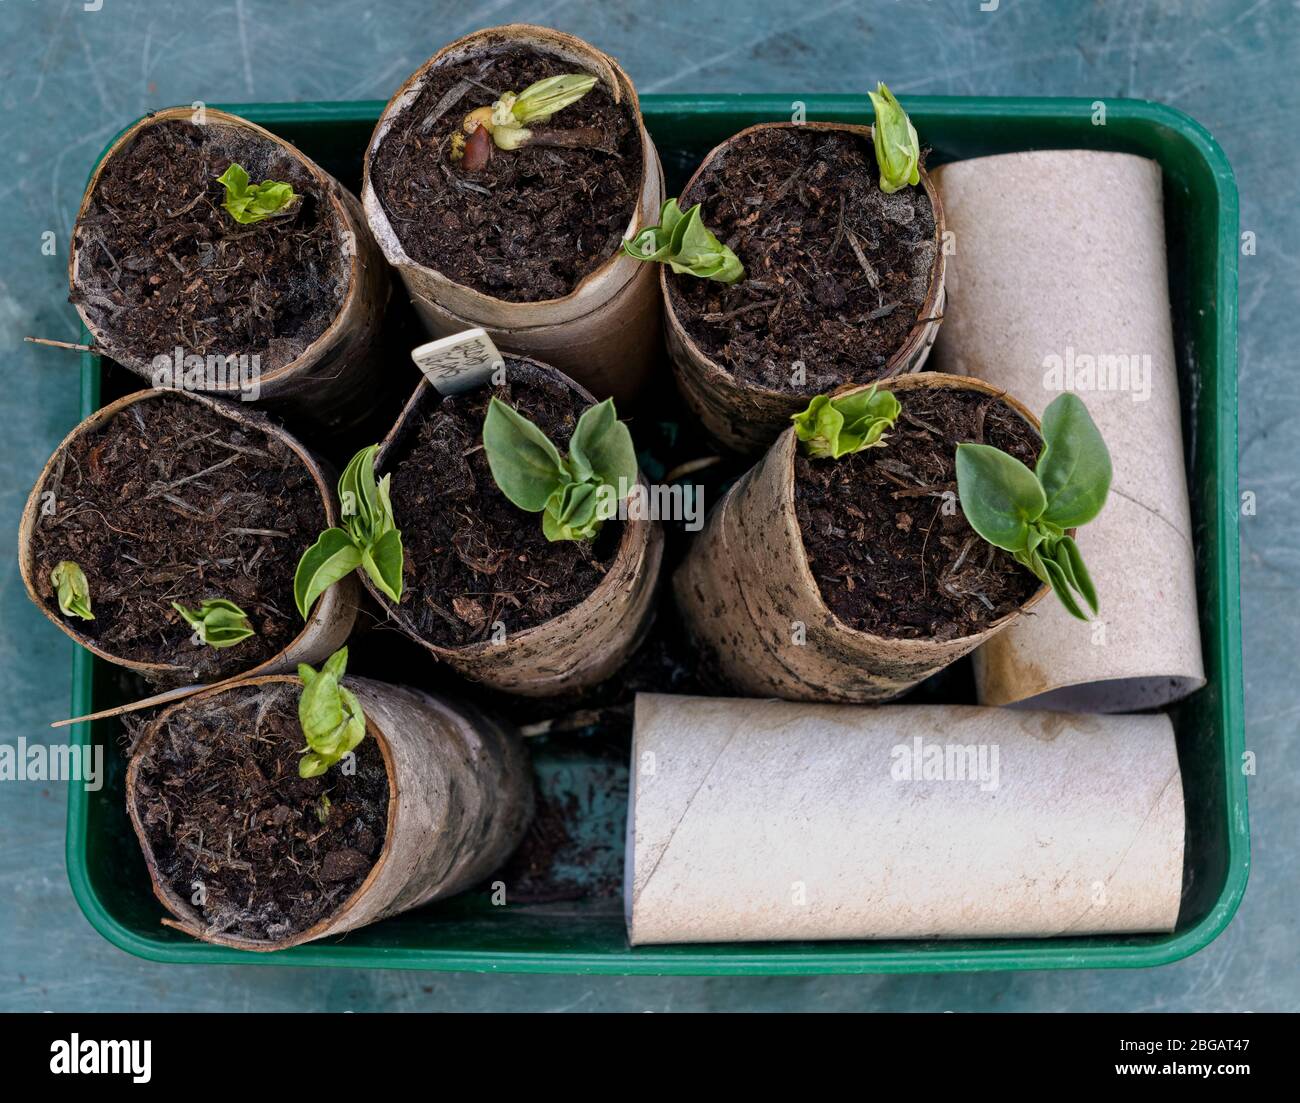 Growing from seeds in toilet roll centers used as alternative to plastic pots Stock Photo